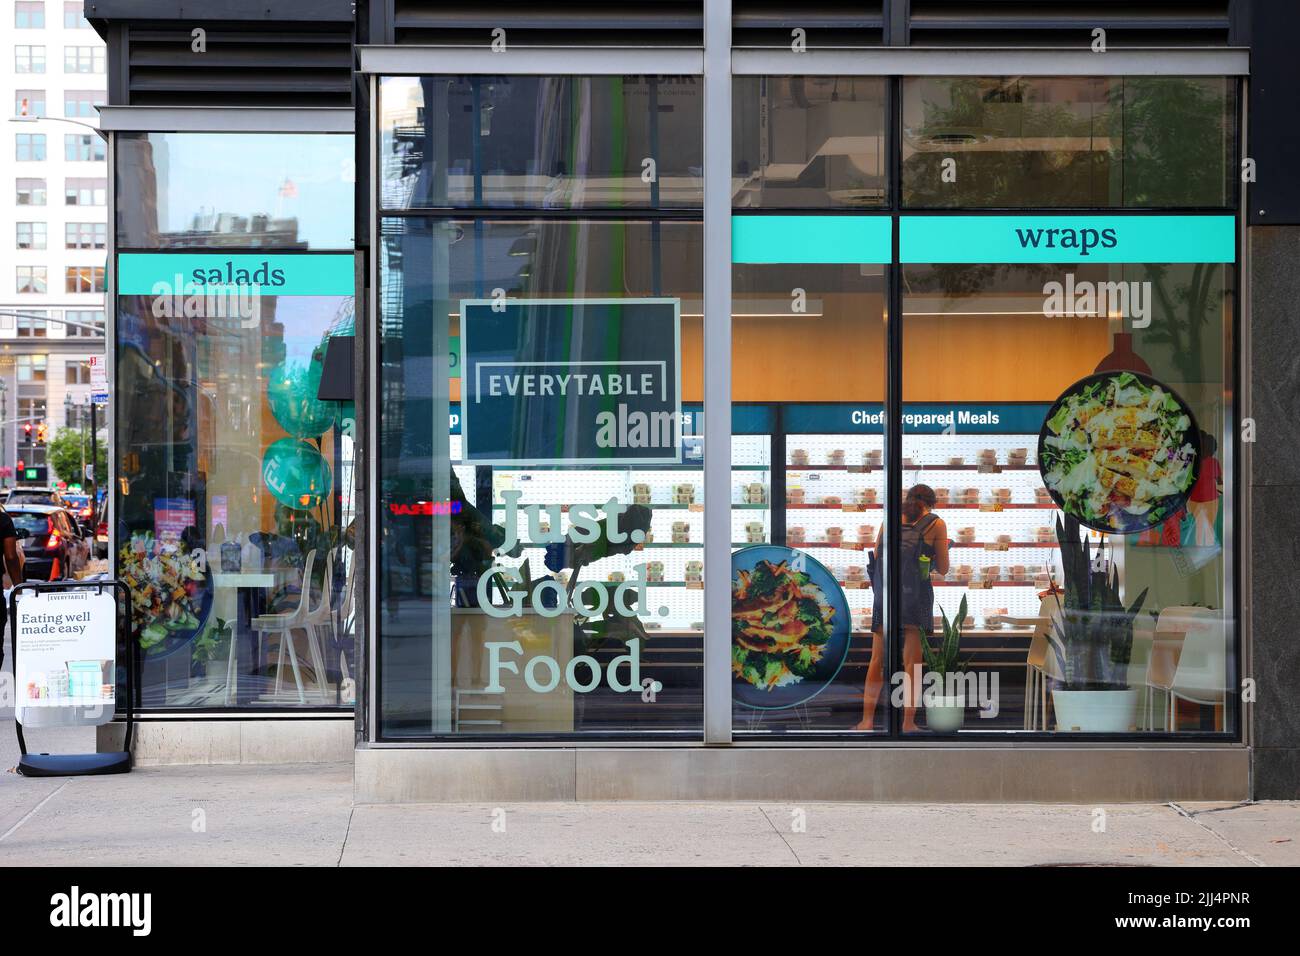 Everytable, 364 8th Ave, New York, NY. exterior storefront of a grab and go prepared meal service with a social mission Stock Photo